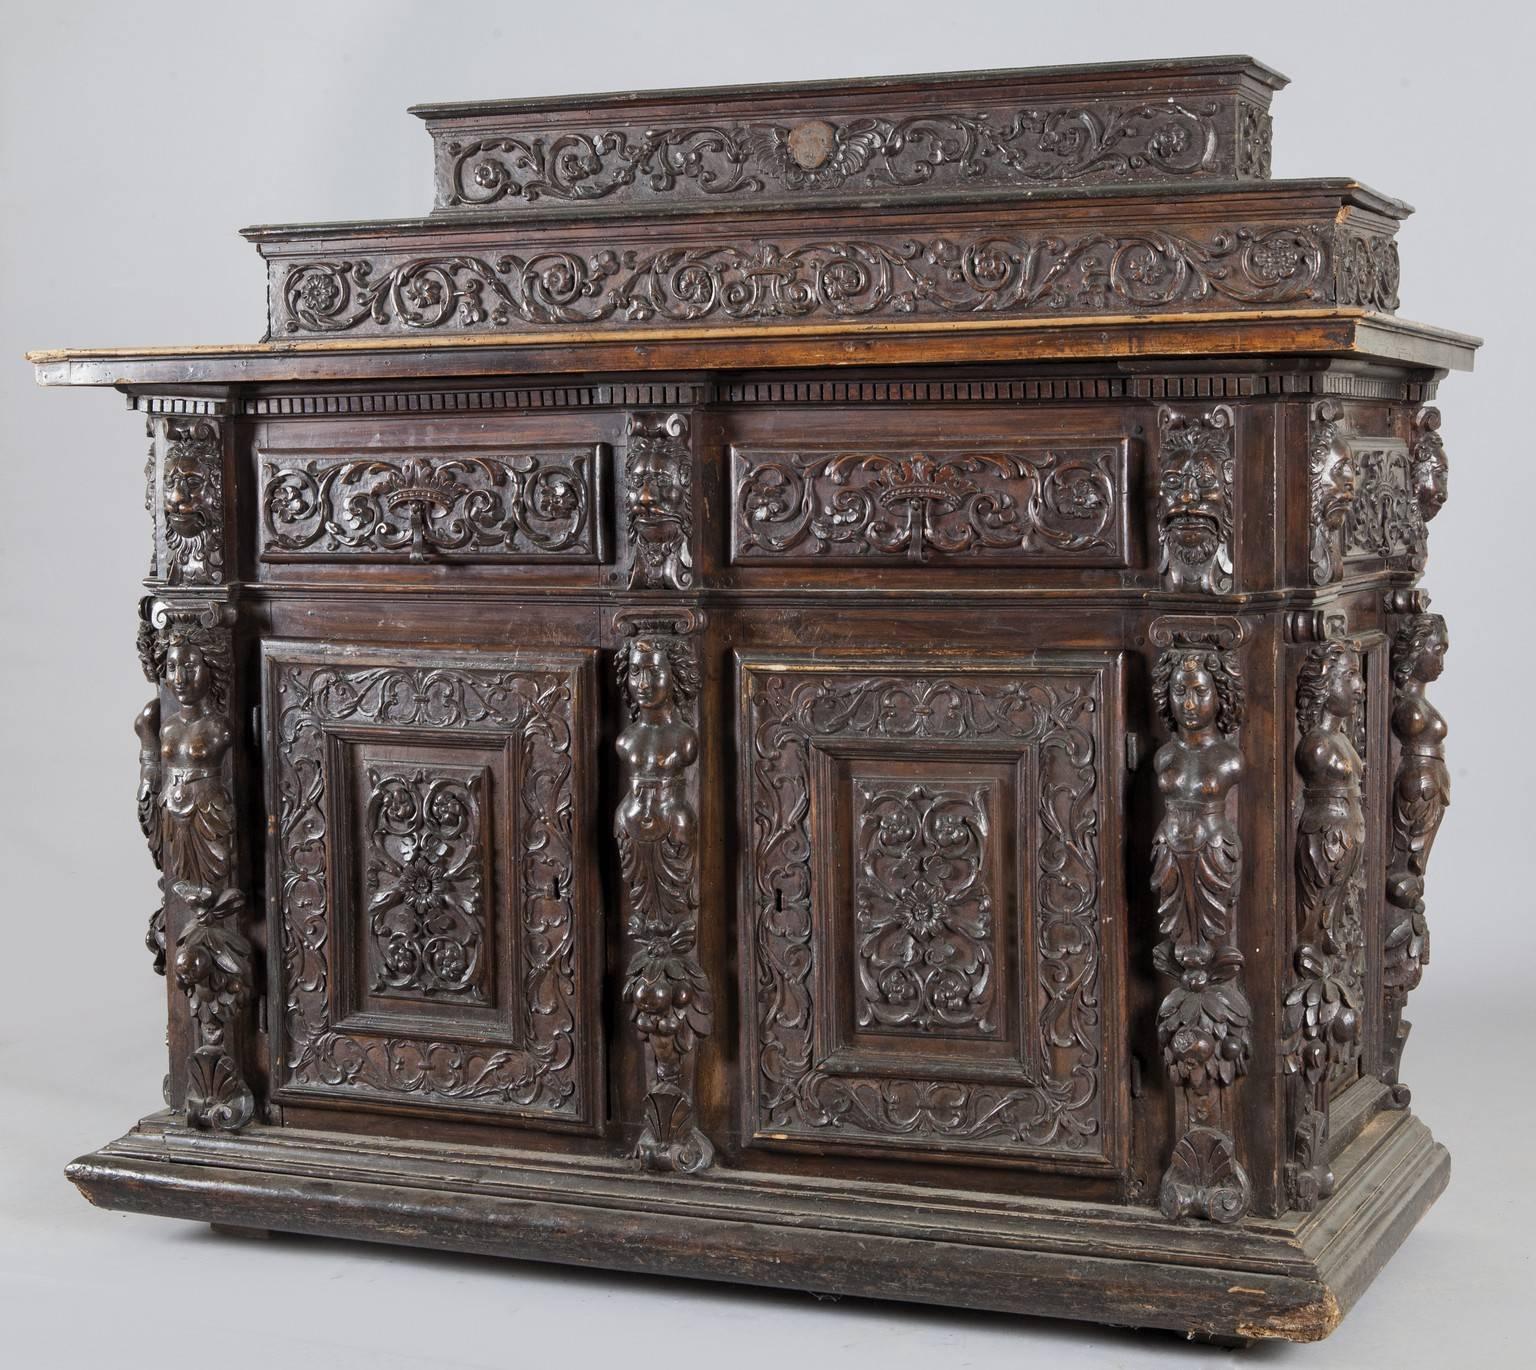 Large carved walnut credenza with two doors and two drawers, raised on two shelves, three front and side pilasters with two small drawers, Piedmont early 17th century.